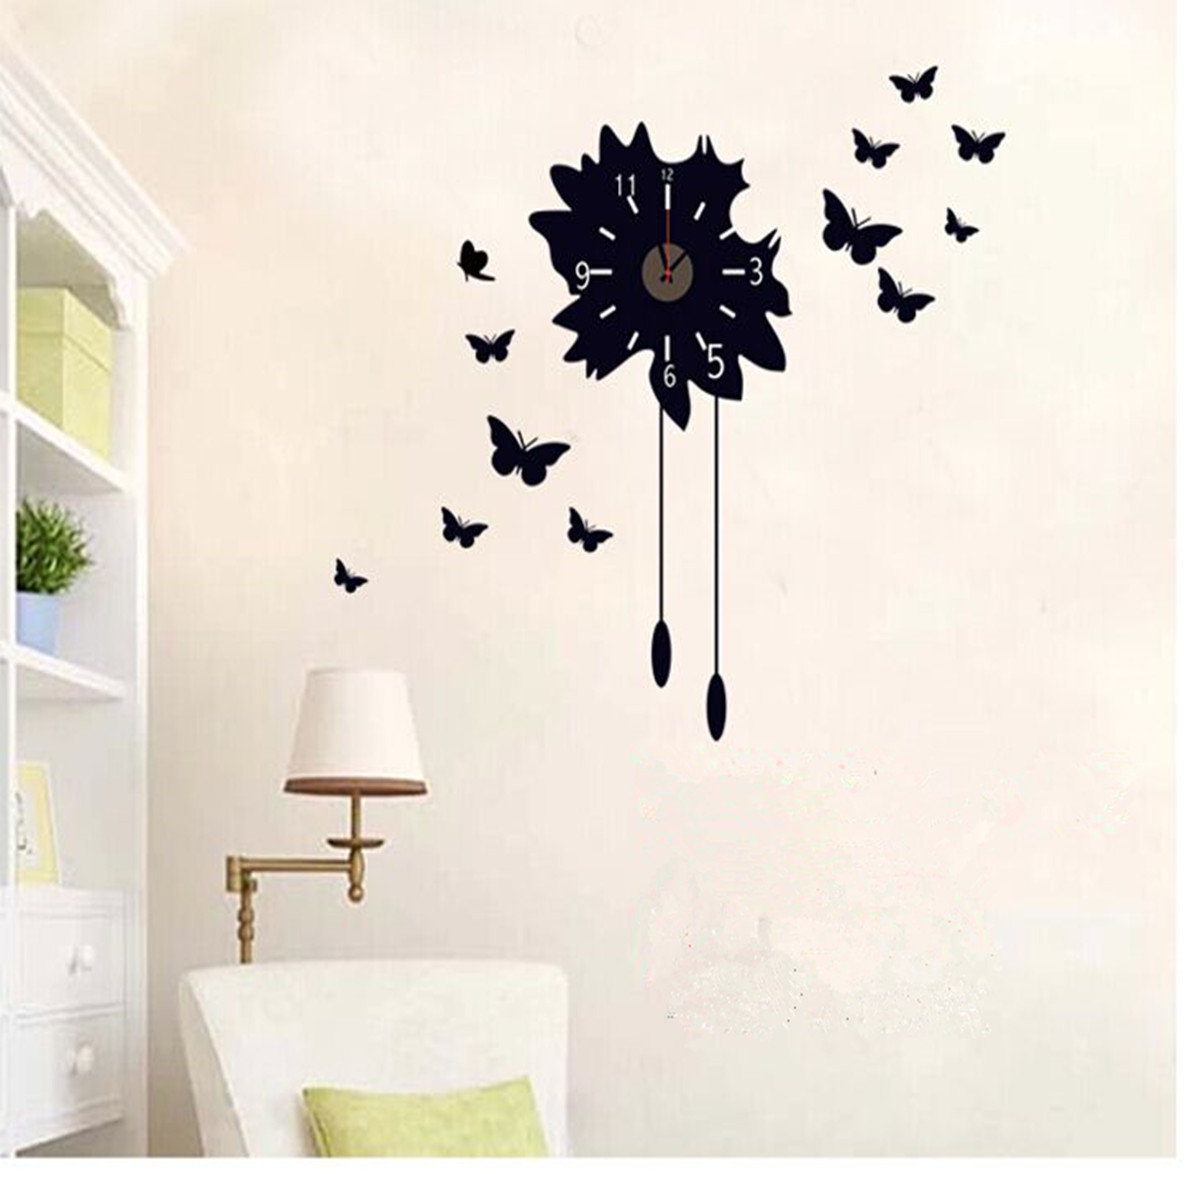 

Creative DIY Removable PVC Black Butterfly Clock Wall Decal Stickers